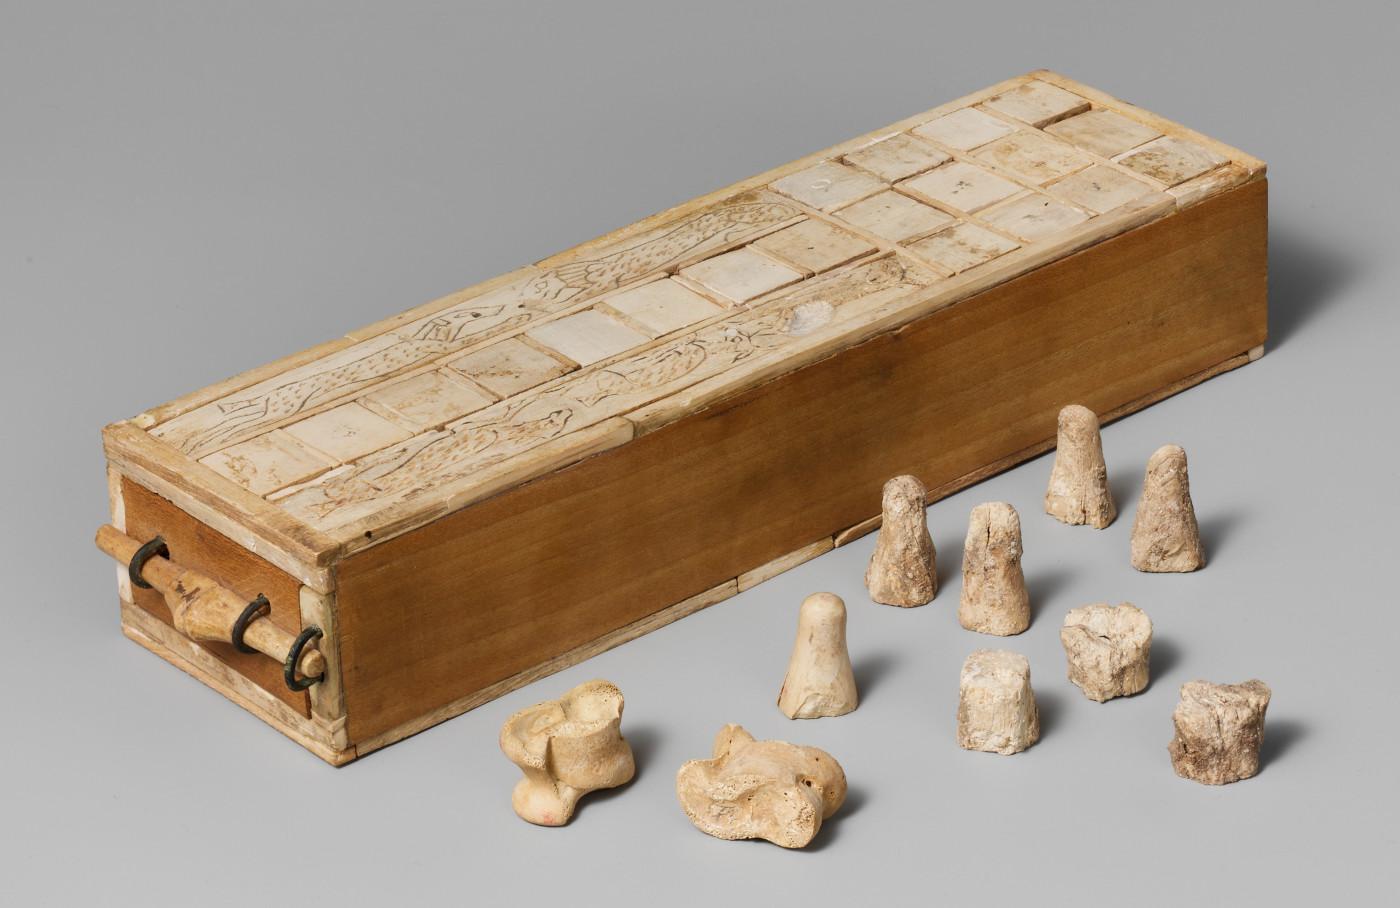 Photo of an Aseb board, with pieces and knucklebones laid out in front of the board